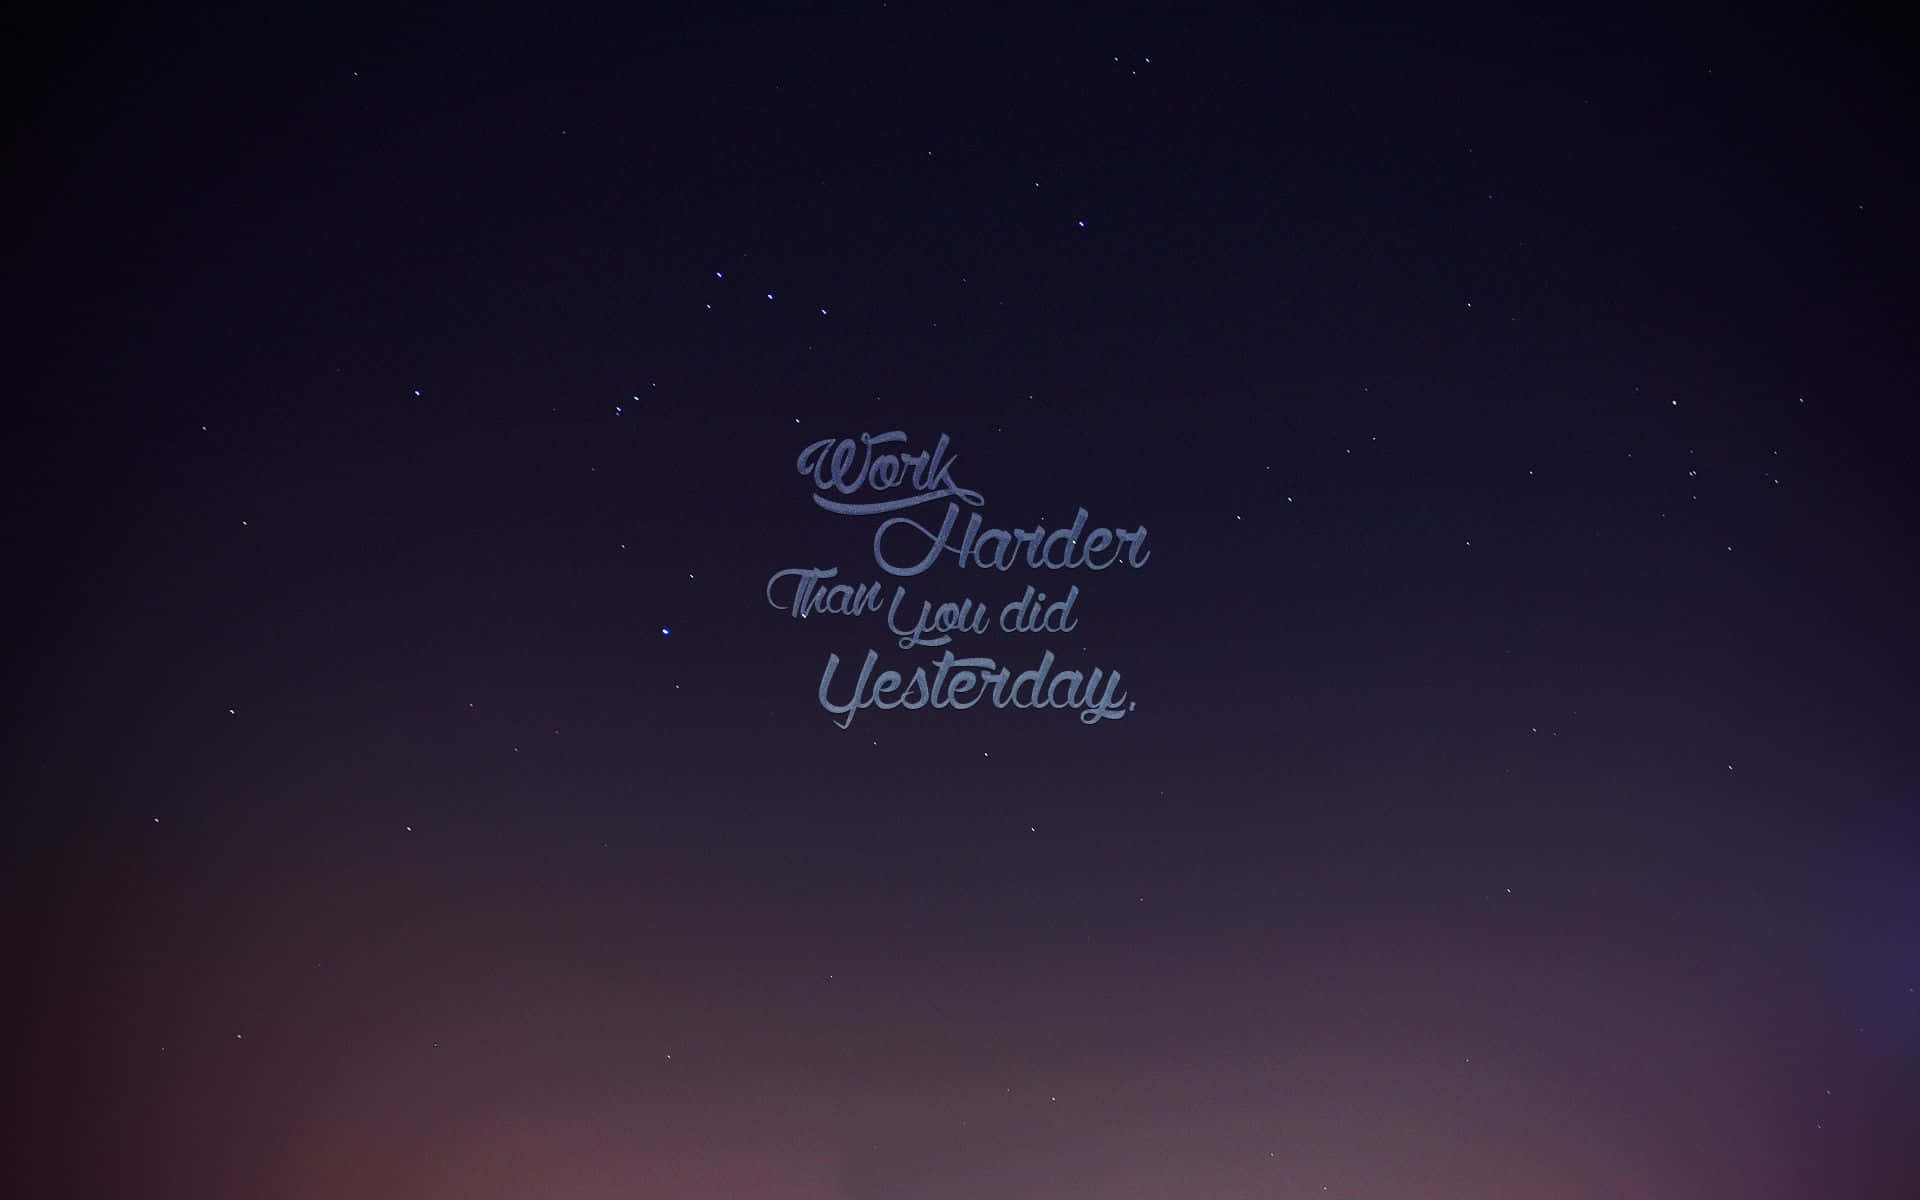 A Night Sky With Stars And A Quote Wallpaper